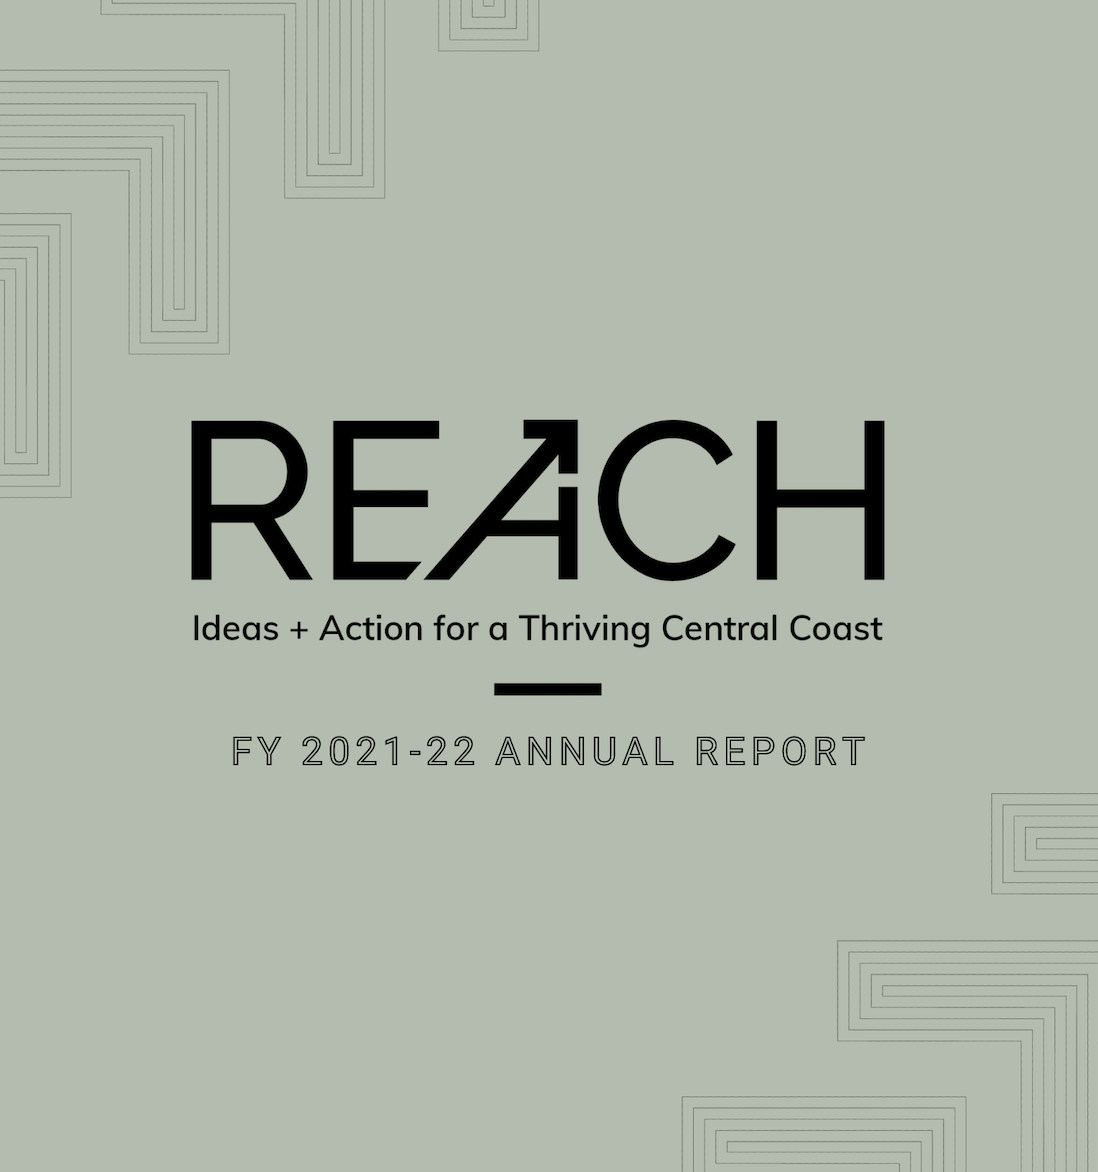 FY 2021-22 Annual Report cover